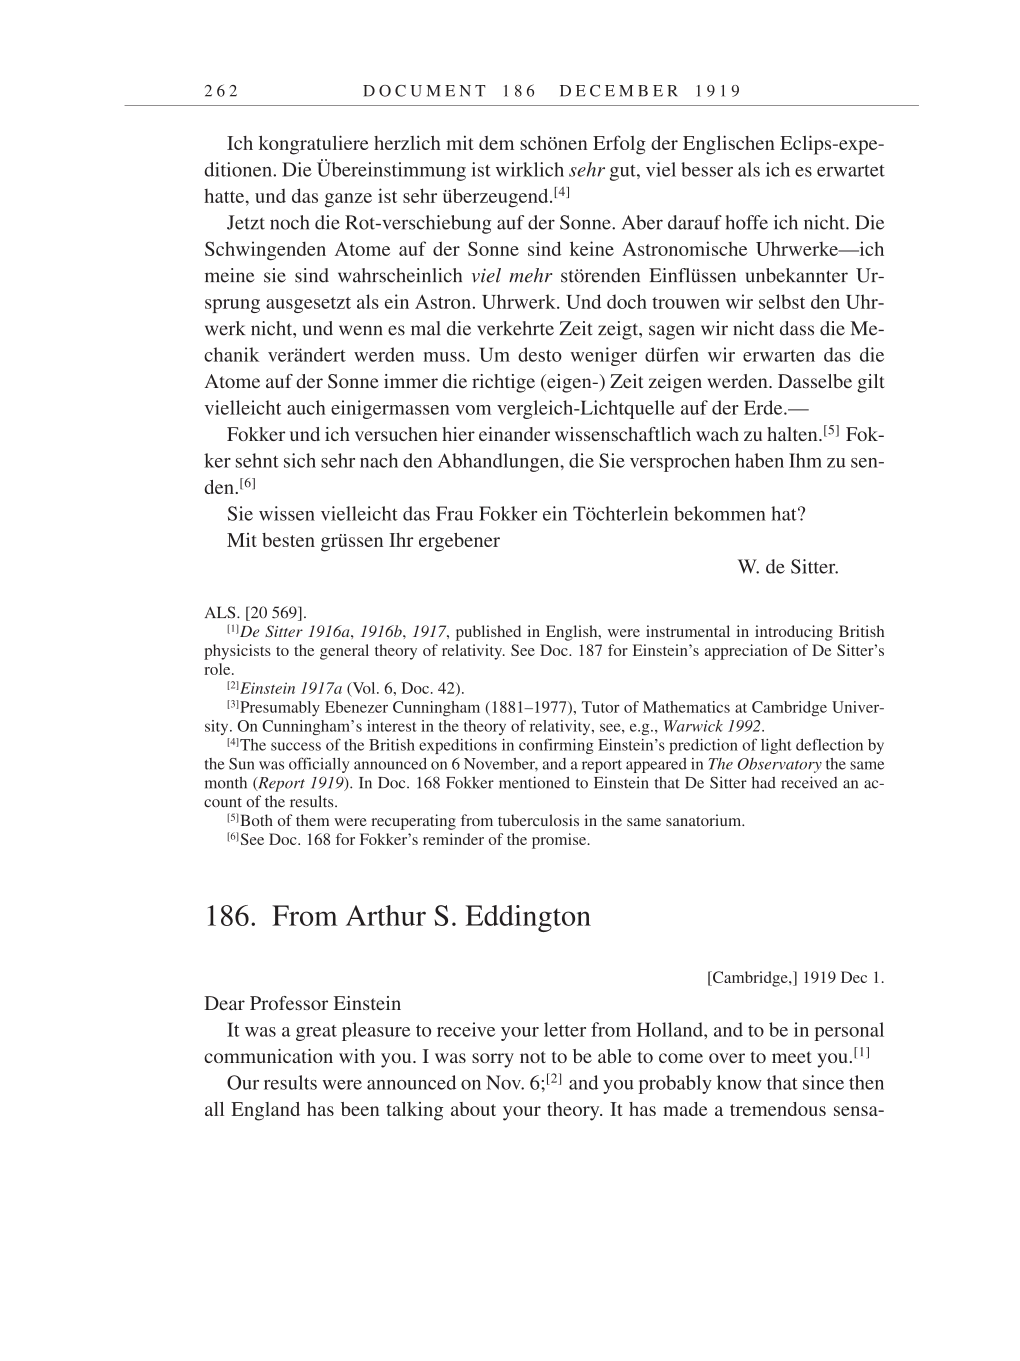 Volume 9: The Berlin Years: Correspondence January 1919-April 1920 page 262